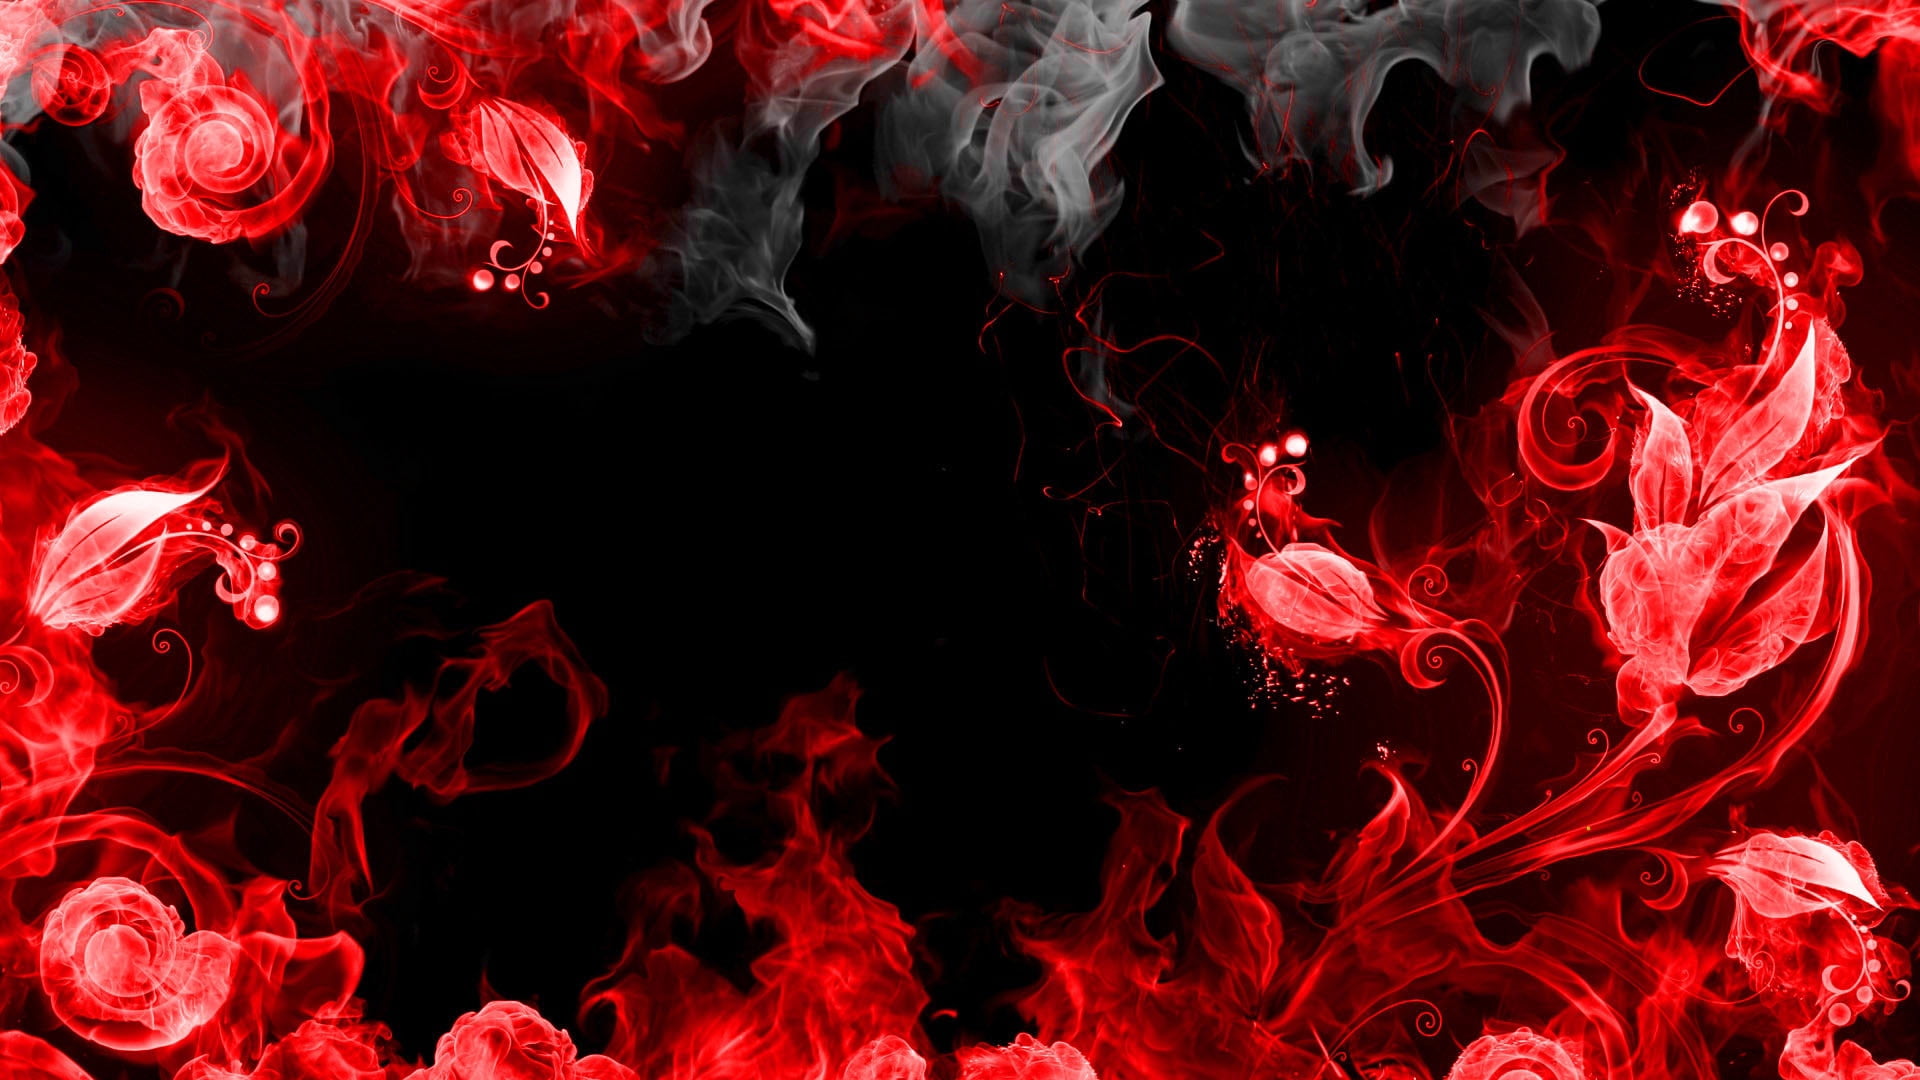 red petaled flowers illustration, abstraction, smoke, black, backgrounds